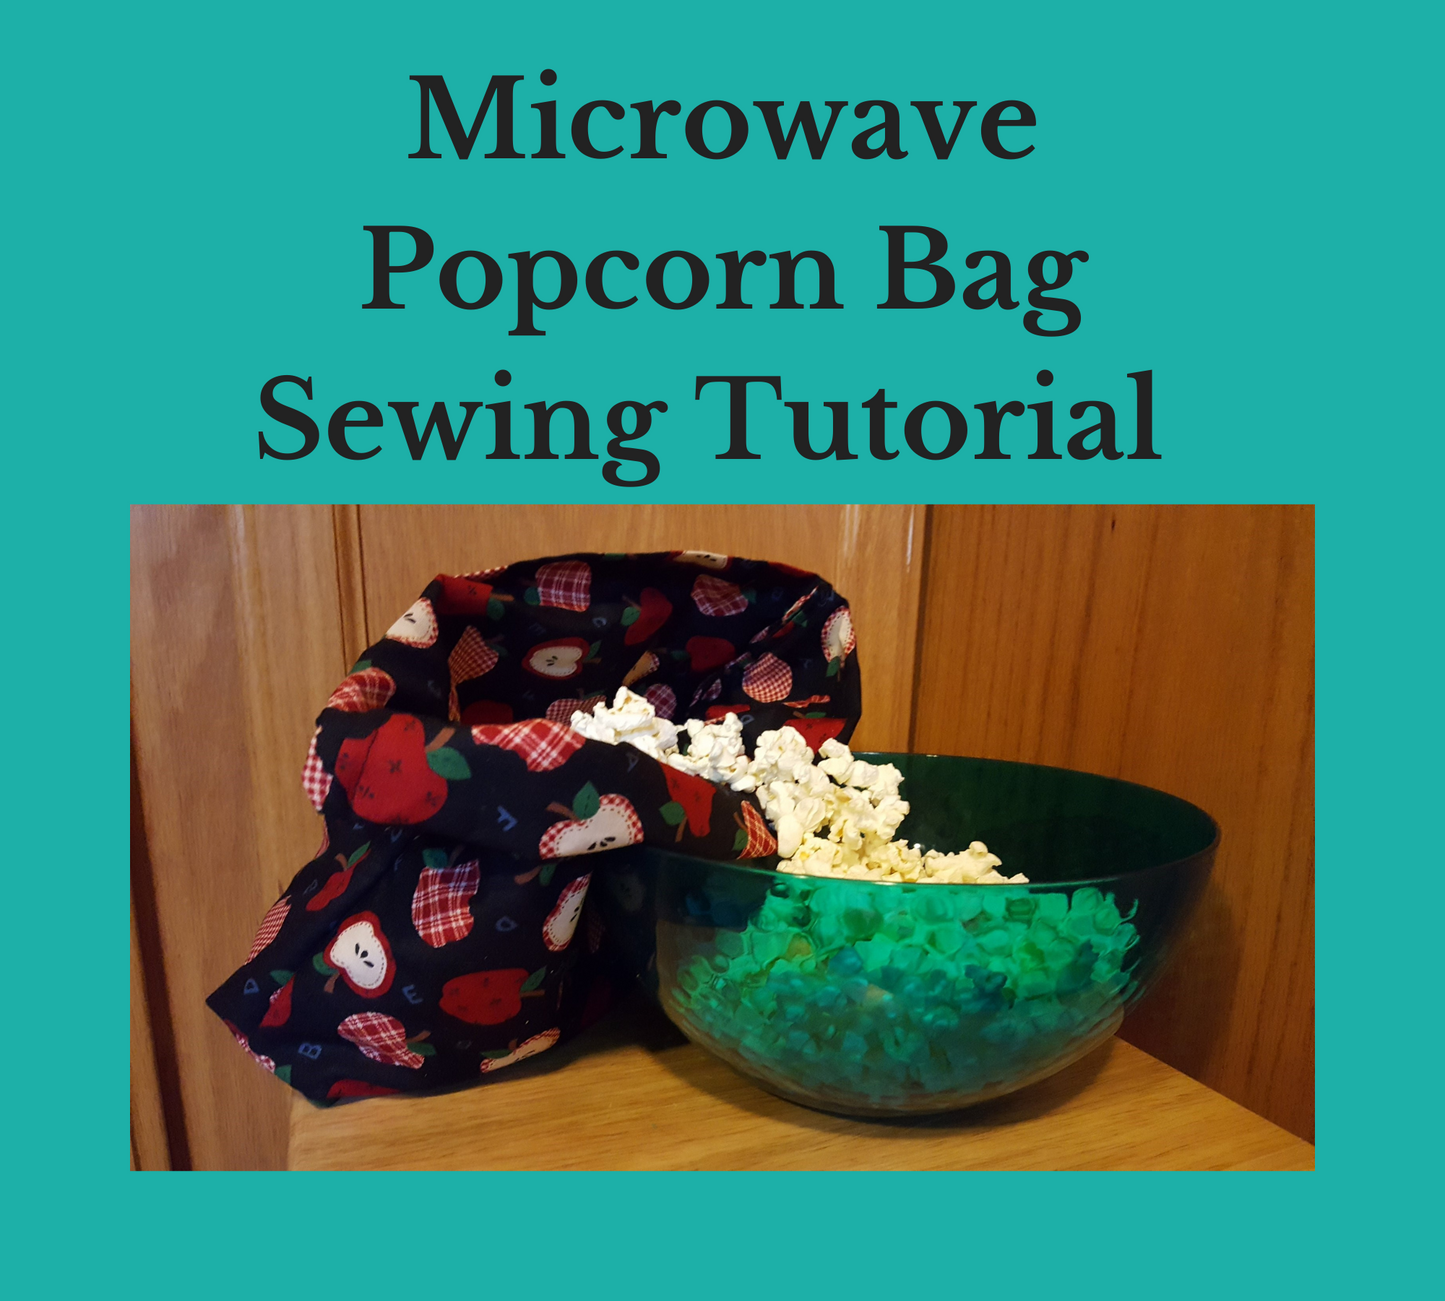 microwave popcorn bag sewing tutorial cotton bag with apple print pouring popped popcorn into a green translucent bowl